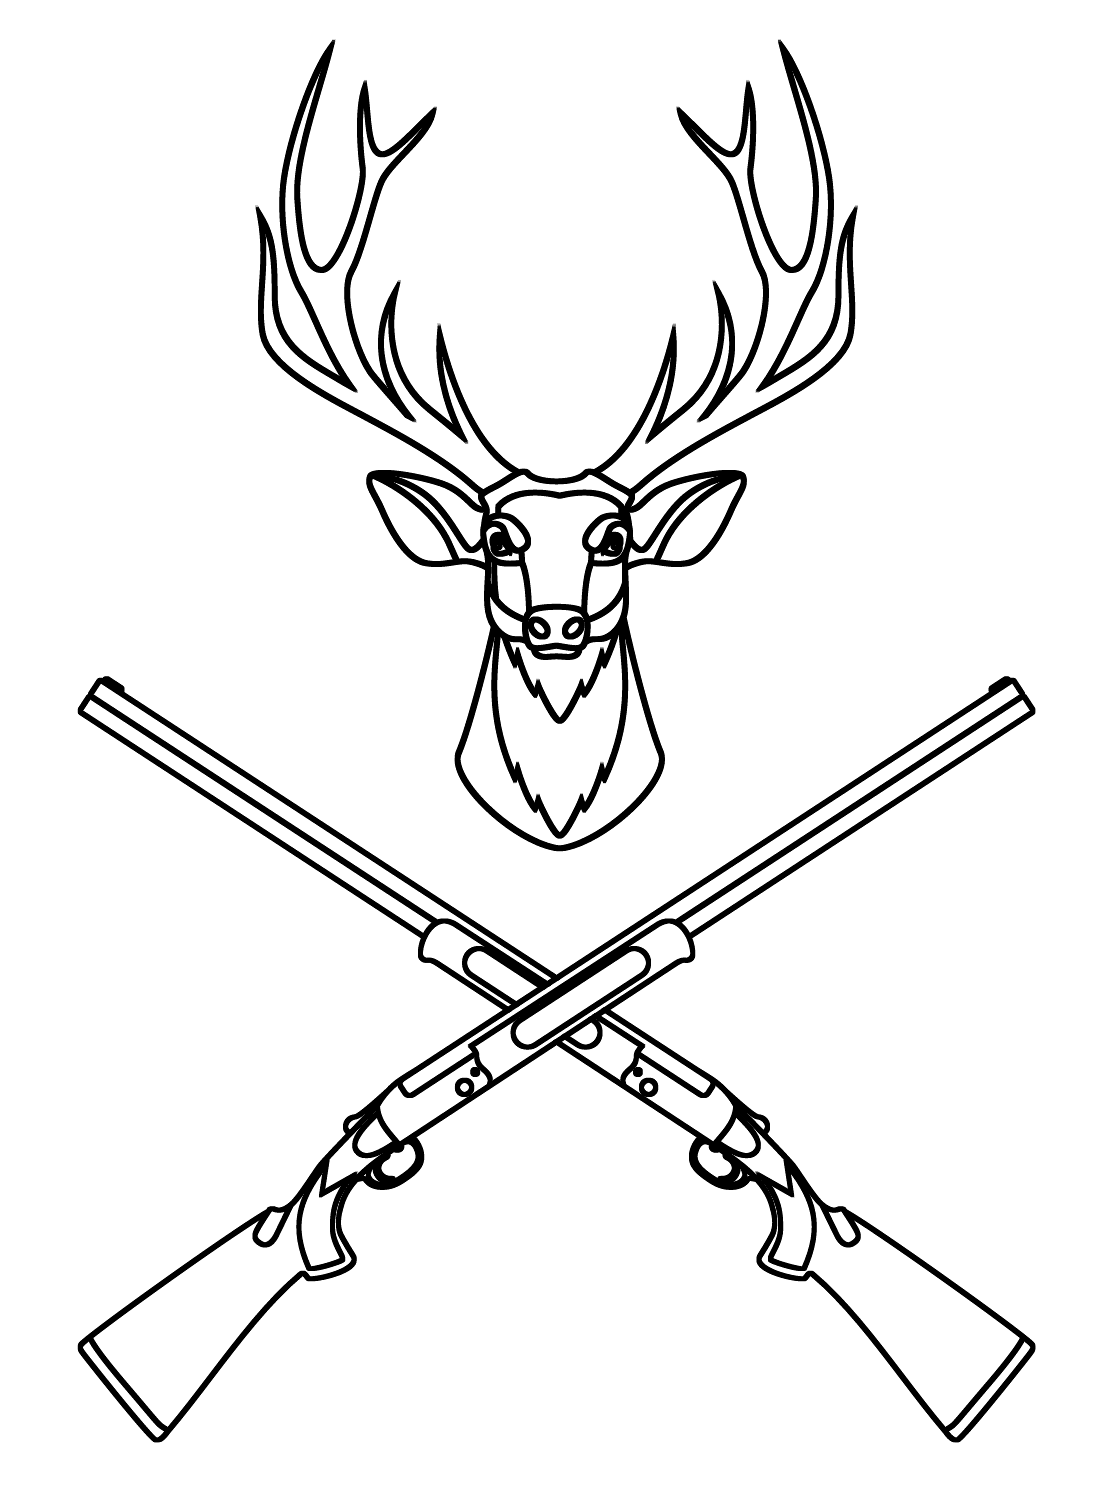 Hunting coloring pages printable for free download